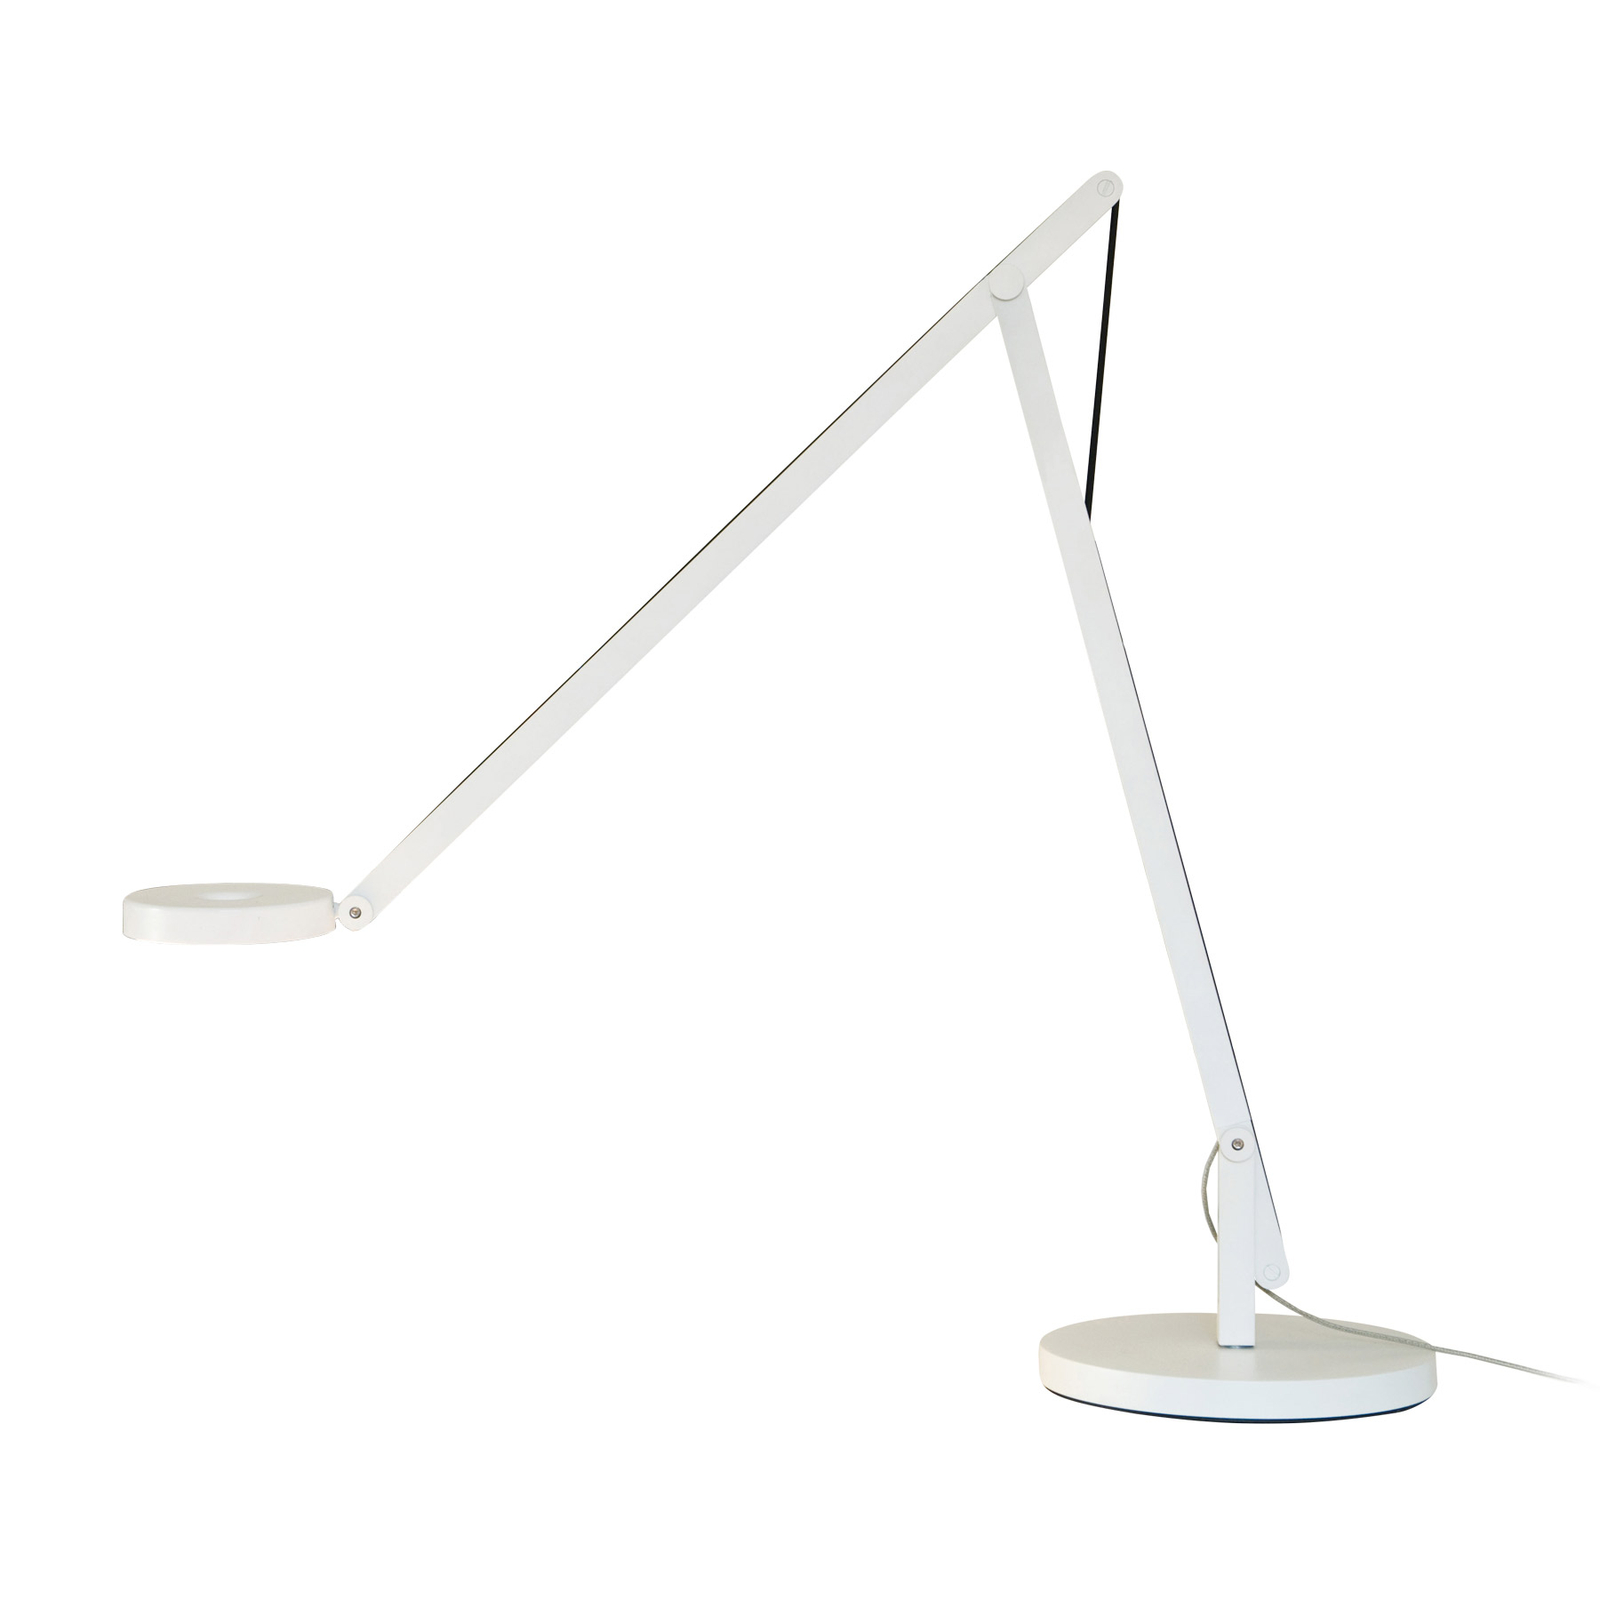 Rotaliana String T1 DTW lampe LED blanche, noire